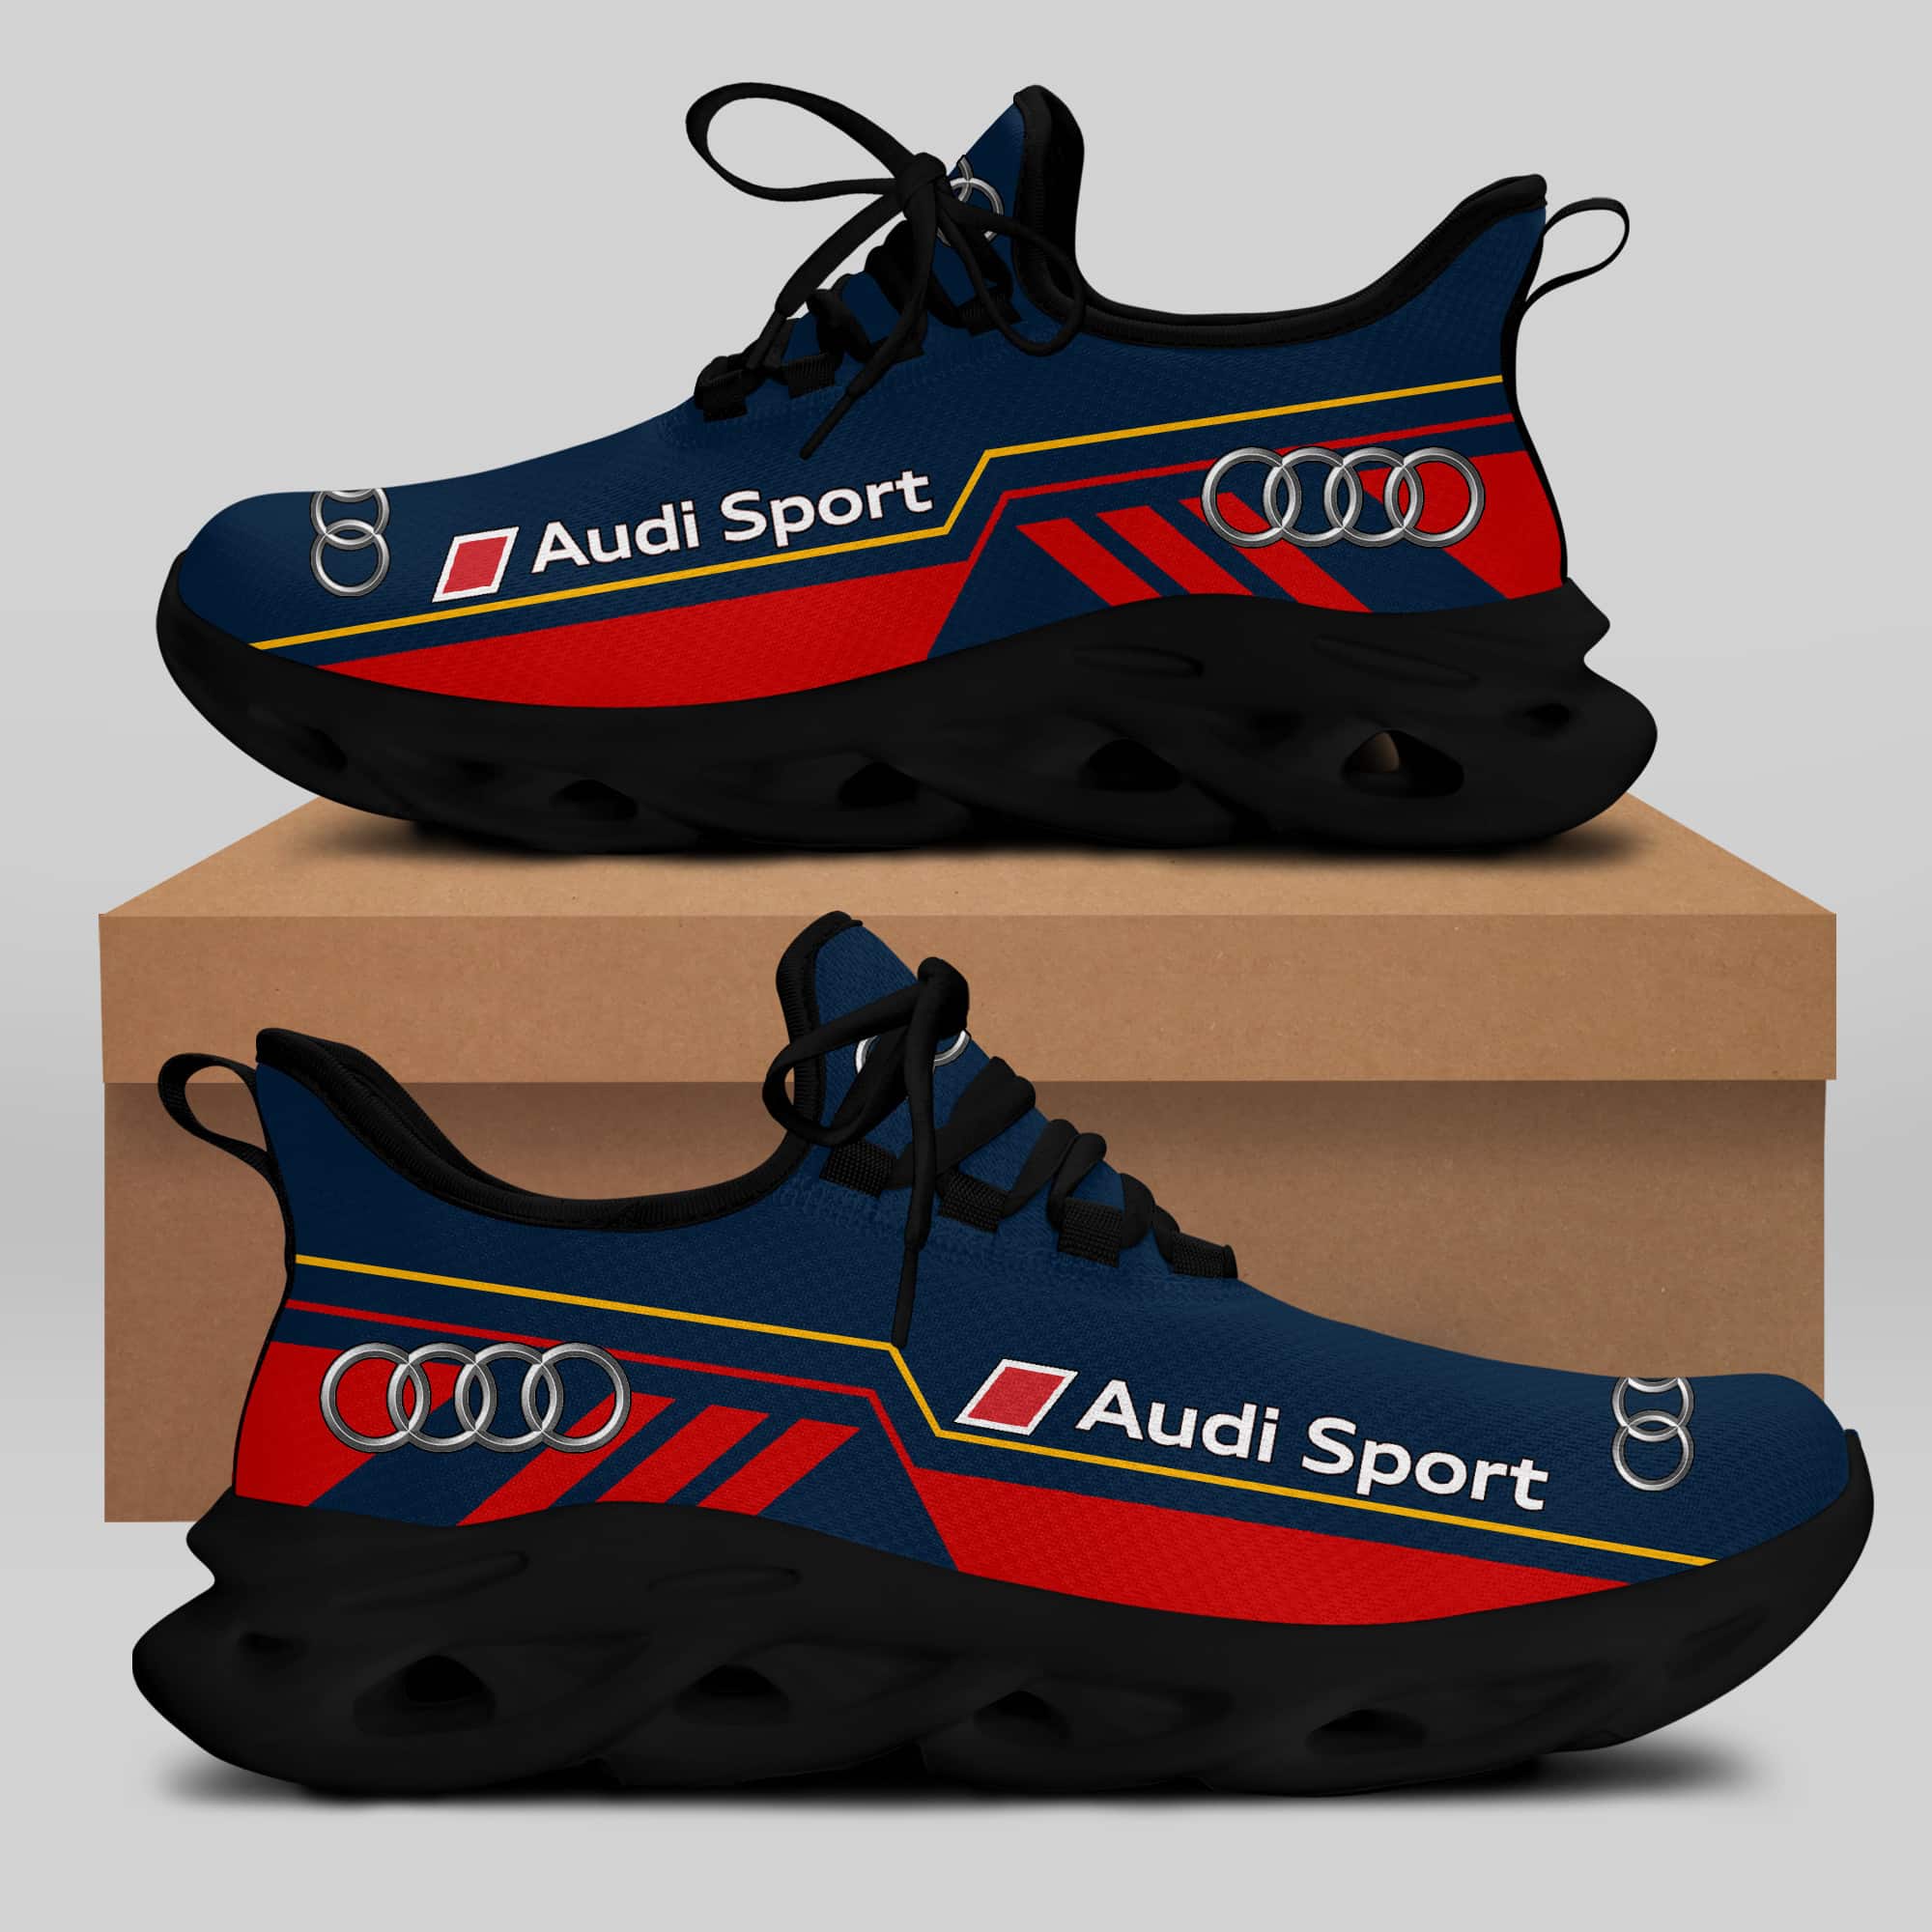 Audi Sport Running Shoes Max Soul Shoes Sneakers Ver 15 1